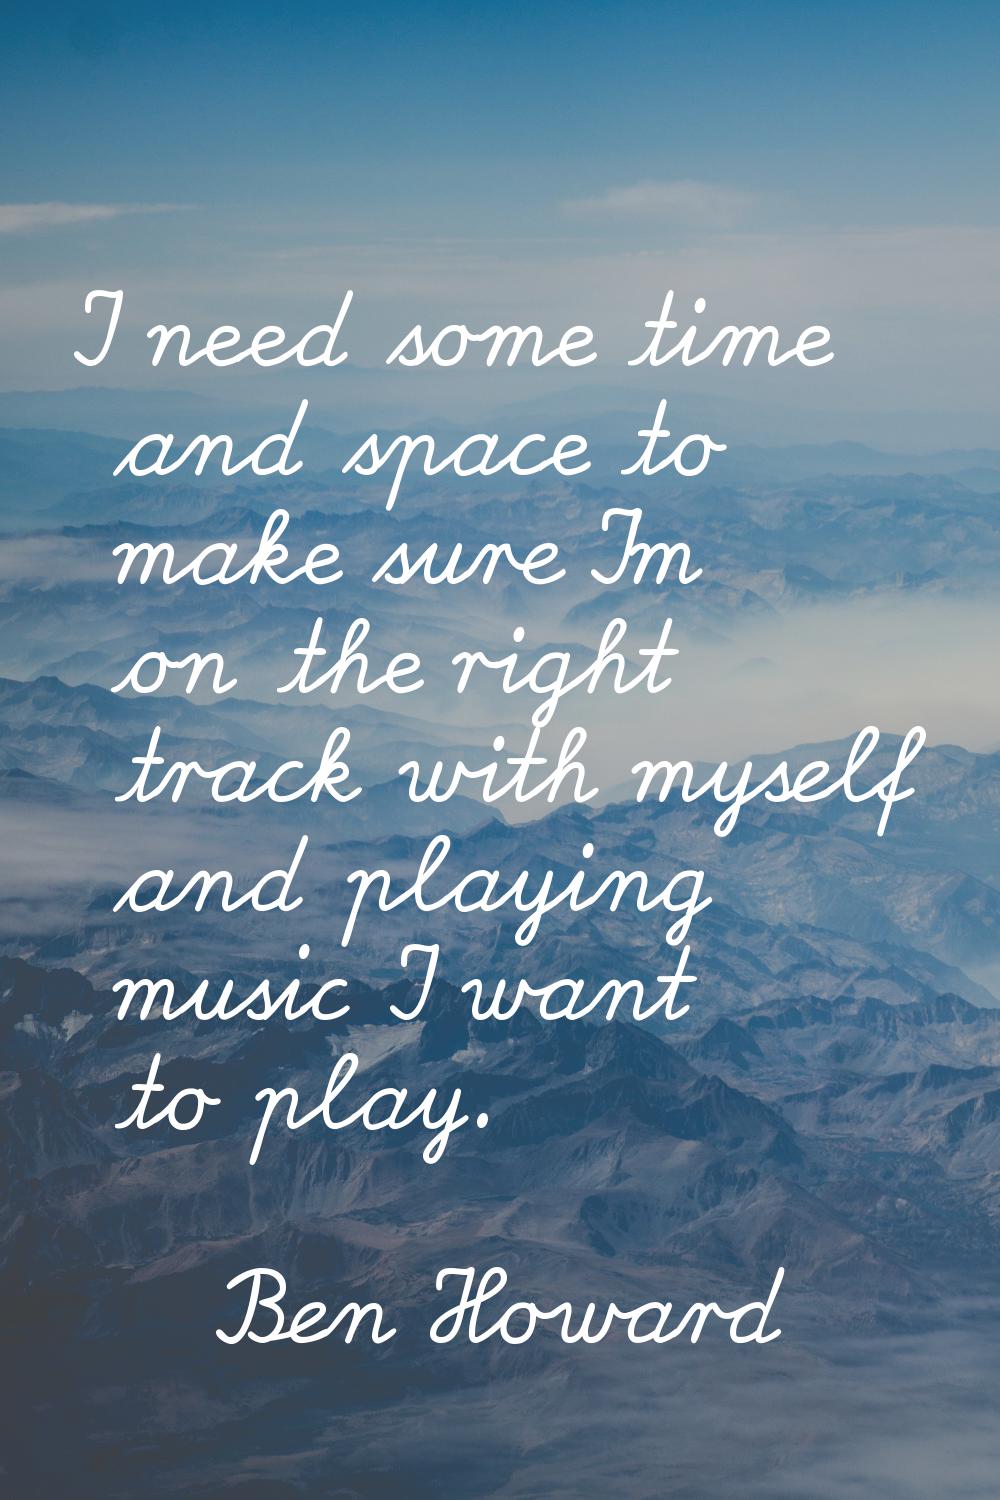 I need some time and space to make sure I'm on the right track with myself and playing music I want